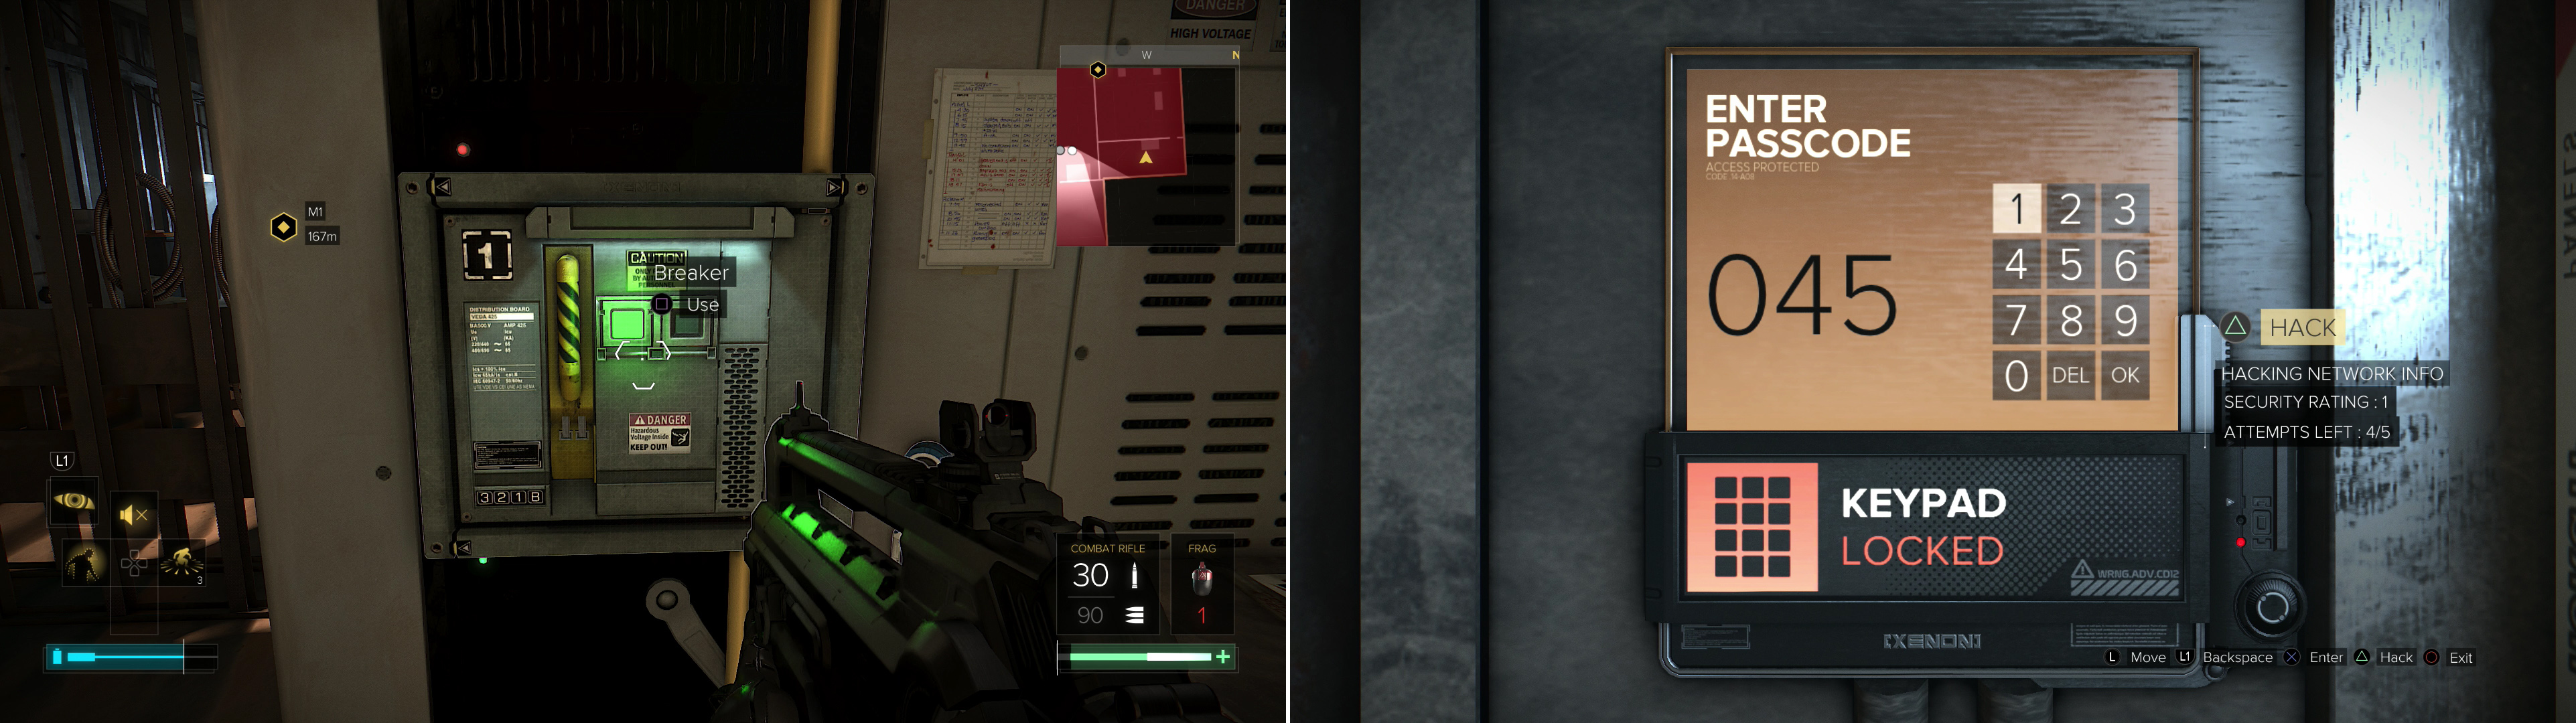 Flip a breaker to restore power to the Keypad (left). Enter the code "0451" into the Keypad to get the trophy/achevement "A Heated Combination" (right).